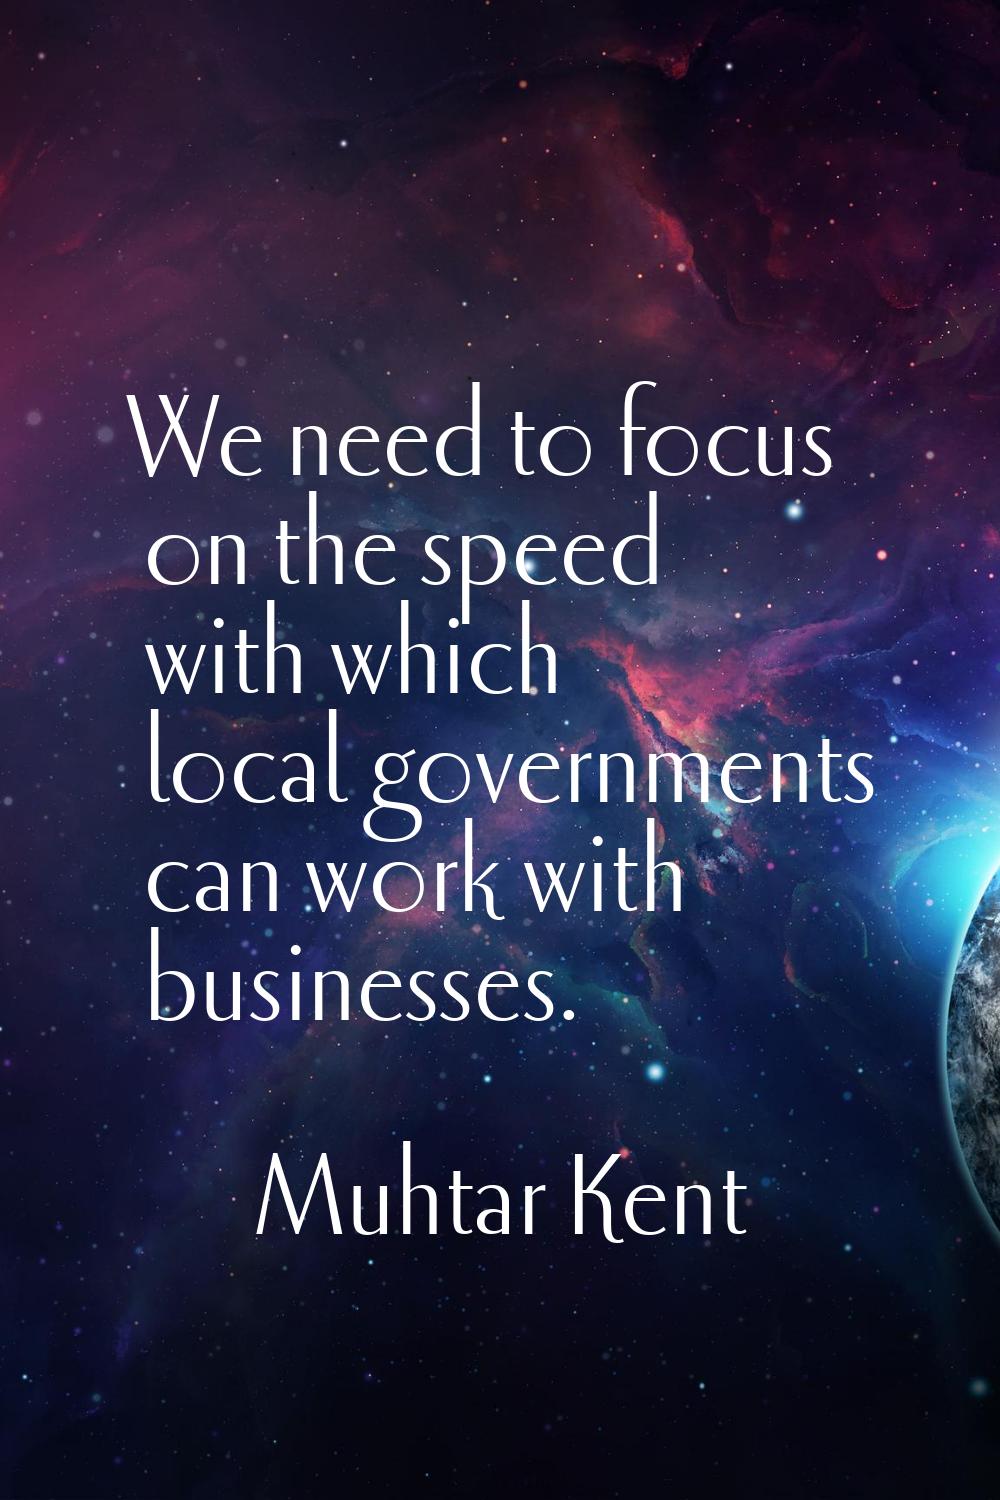 We need to focus on the speed with which local governments can work with businesses.